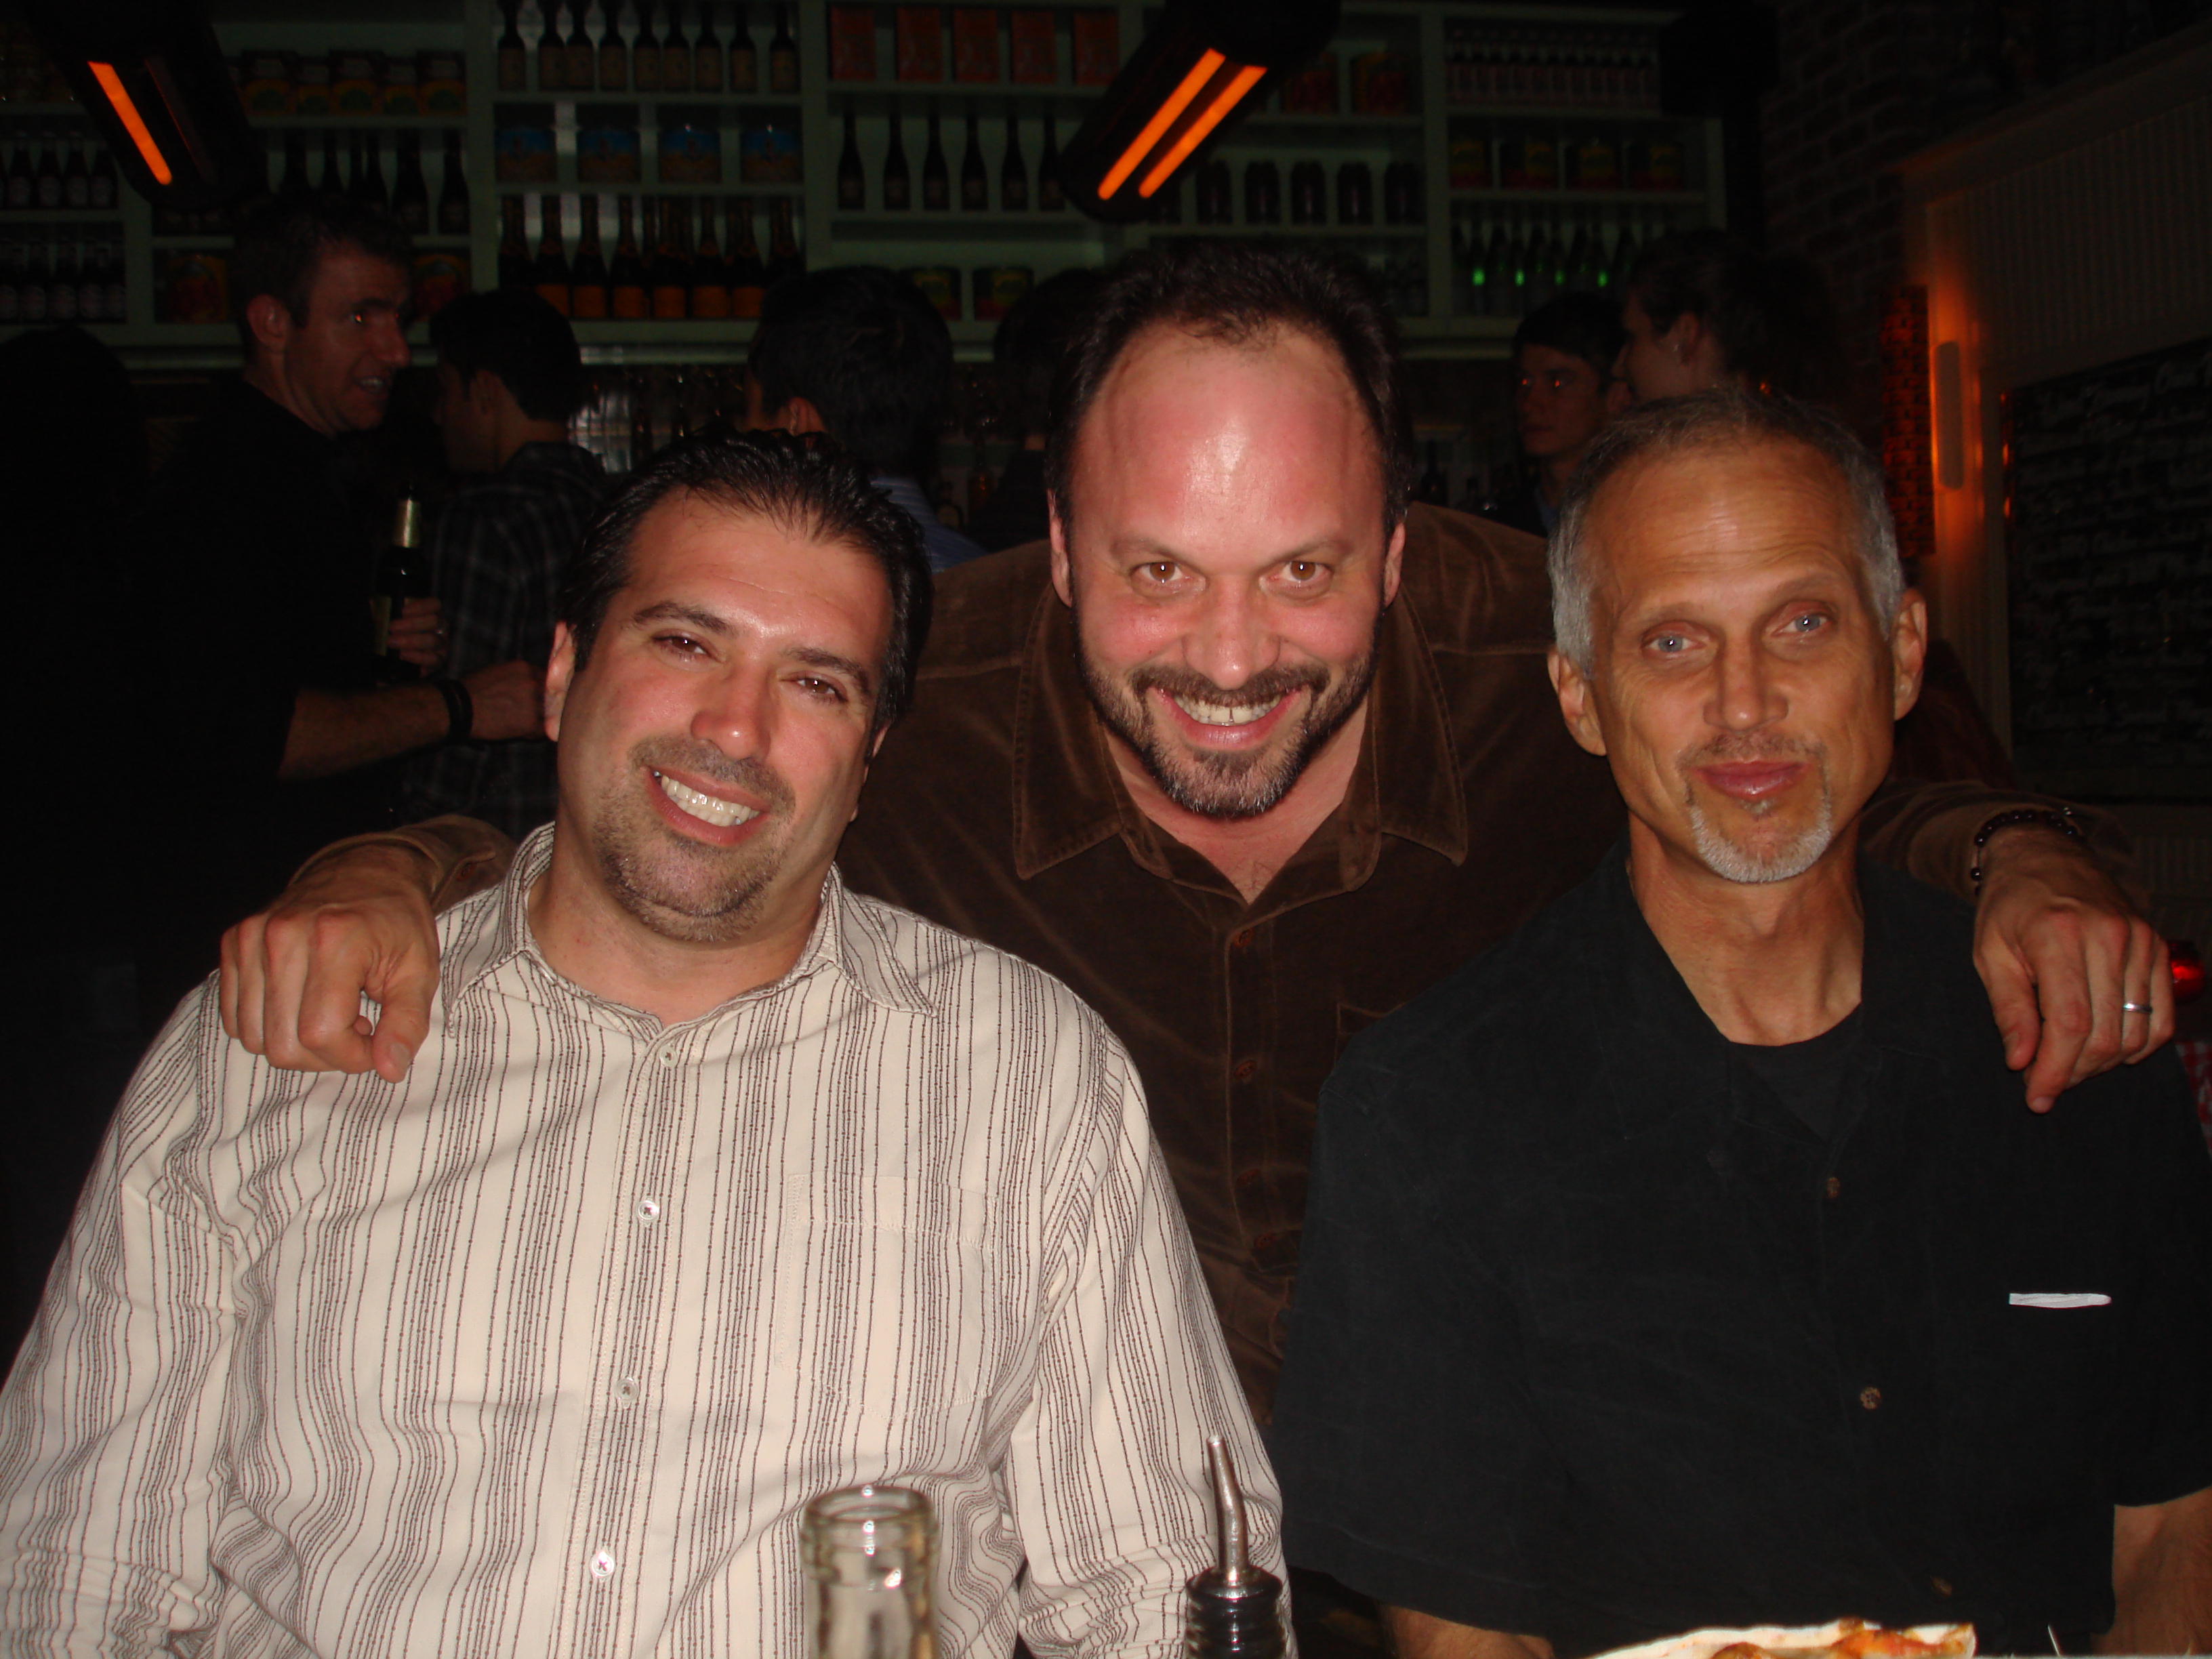 Best friends...Bill Farrahi (Chicago businessman) and Lawrence Smilgys (actor/screenwriter)